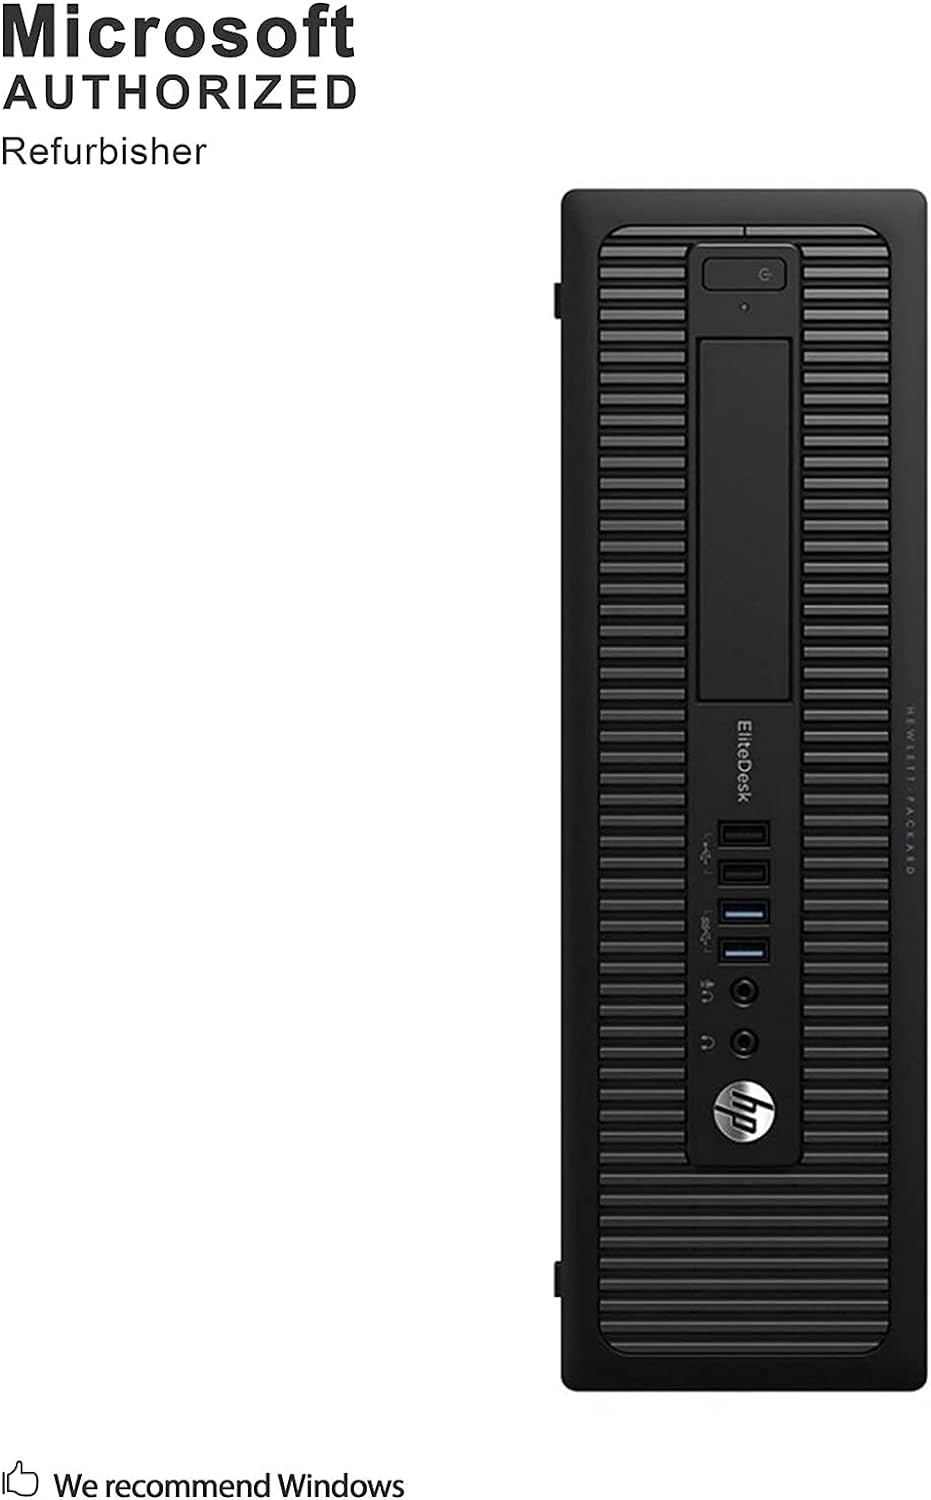 HP EliteDesk 705 G1 Small Form Factor PC, AMD Quad A10 PRO-7800B up to 3.9GHz, 8G DDR3, 500G, DVD, WiFi, BT 4.0, Windows 10 Pro 64 Bit-Multi-Language Supports English/Spanish/French(Renewed)